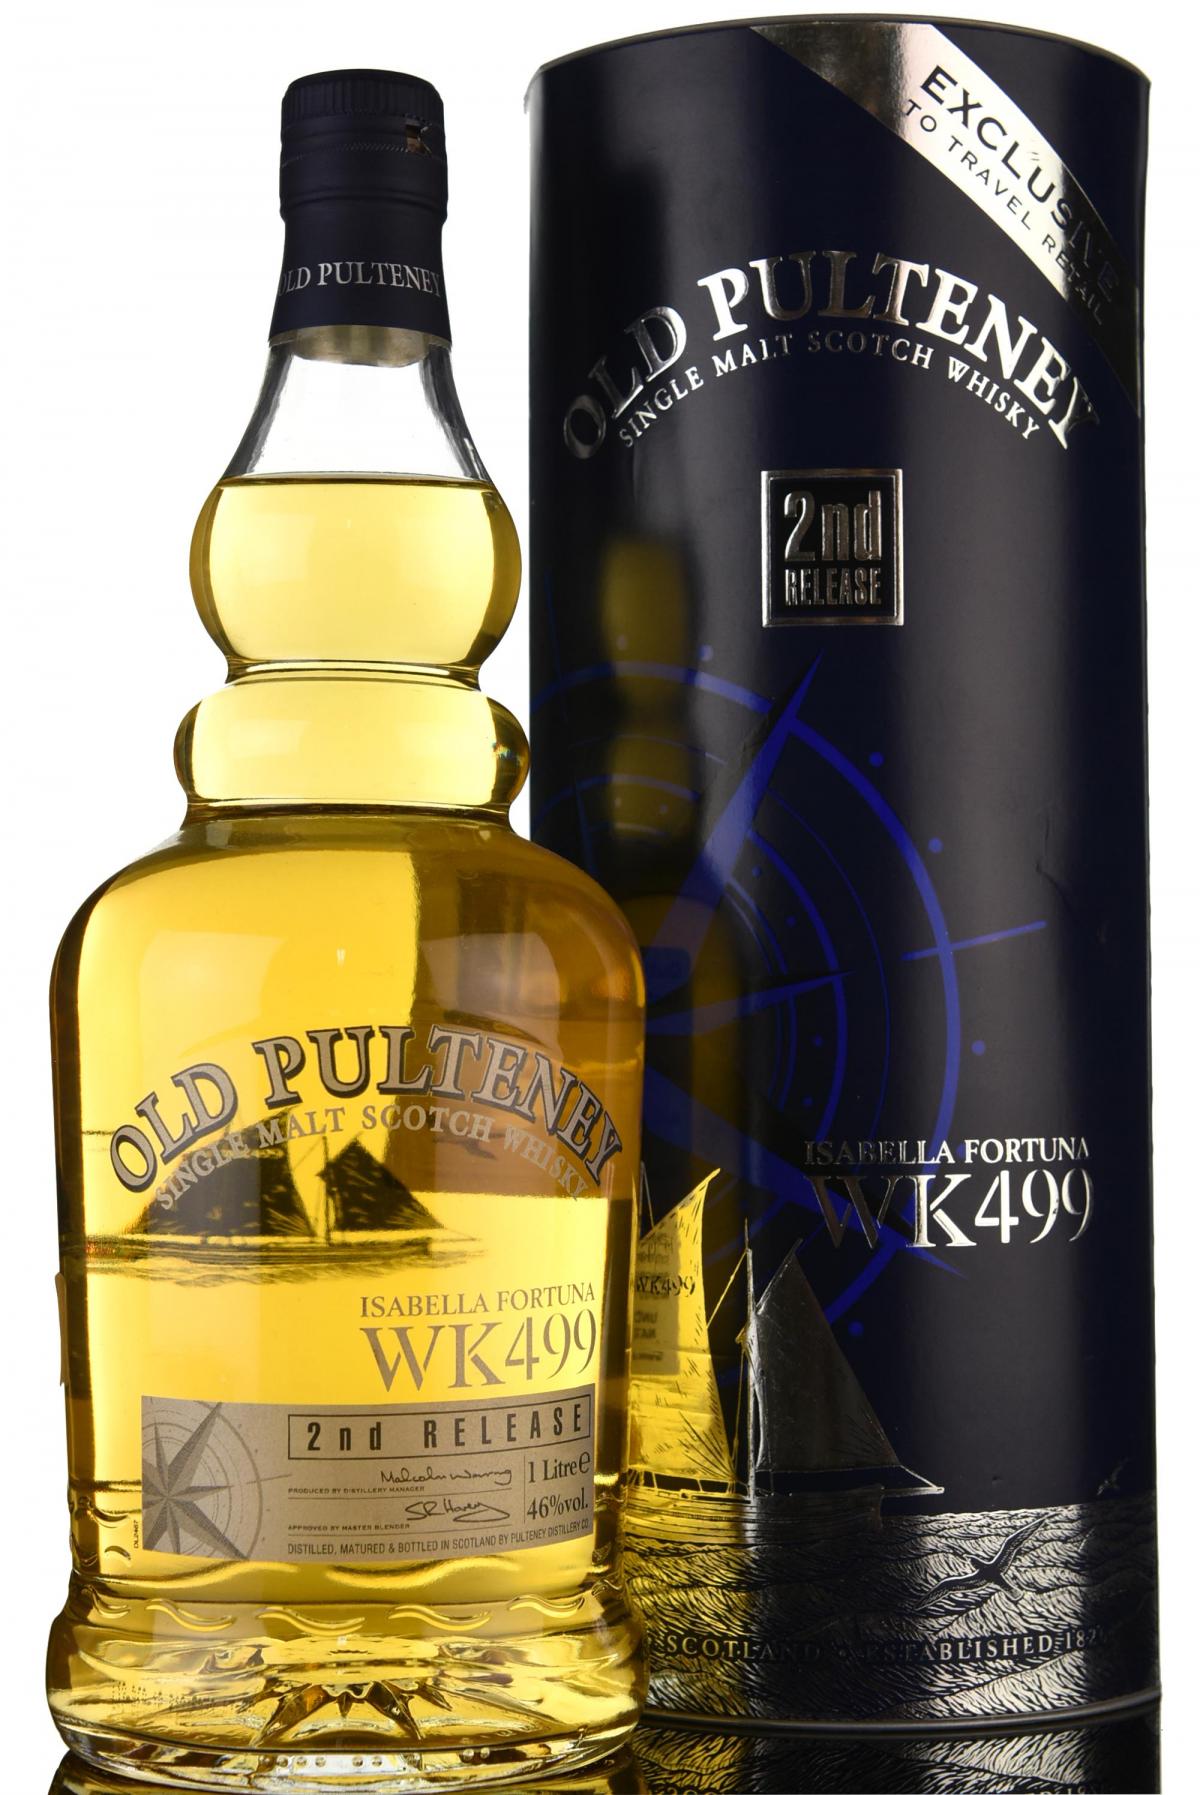 Old Pulteney WK499 Isabella Fortuna - 2nd Release - Travel Retail Exclusive - 2011 Release